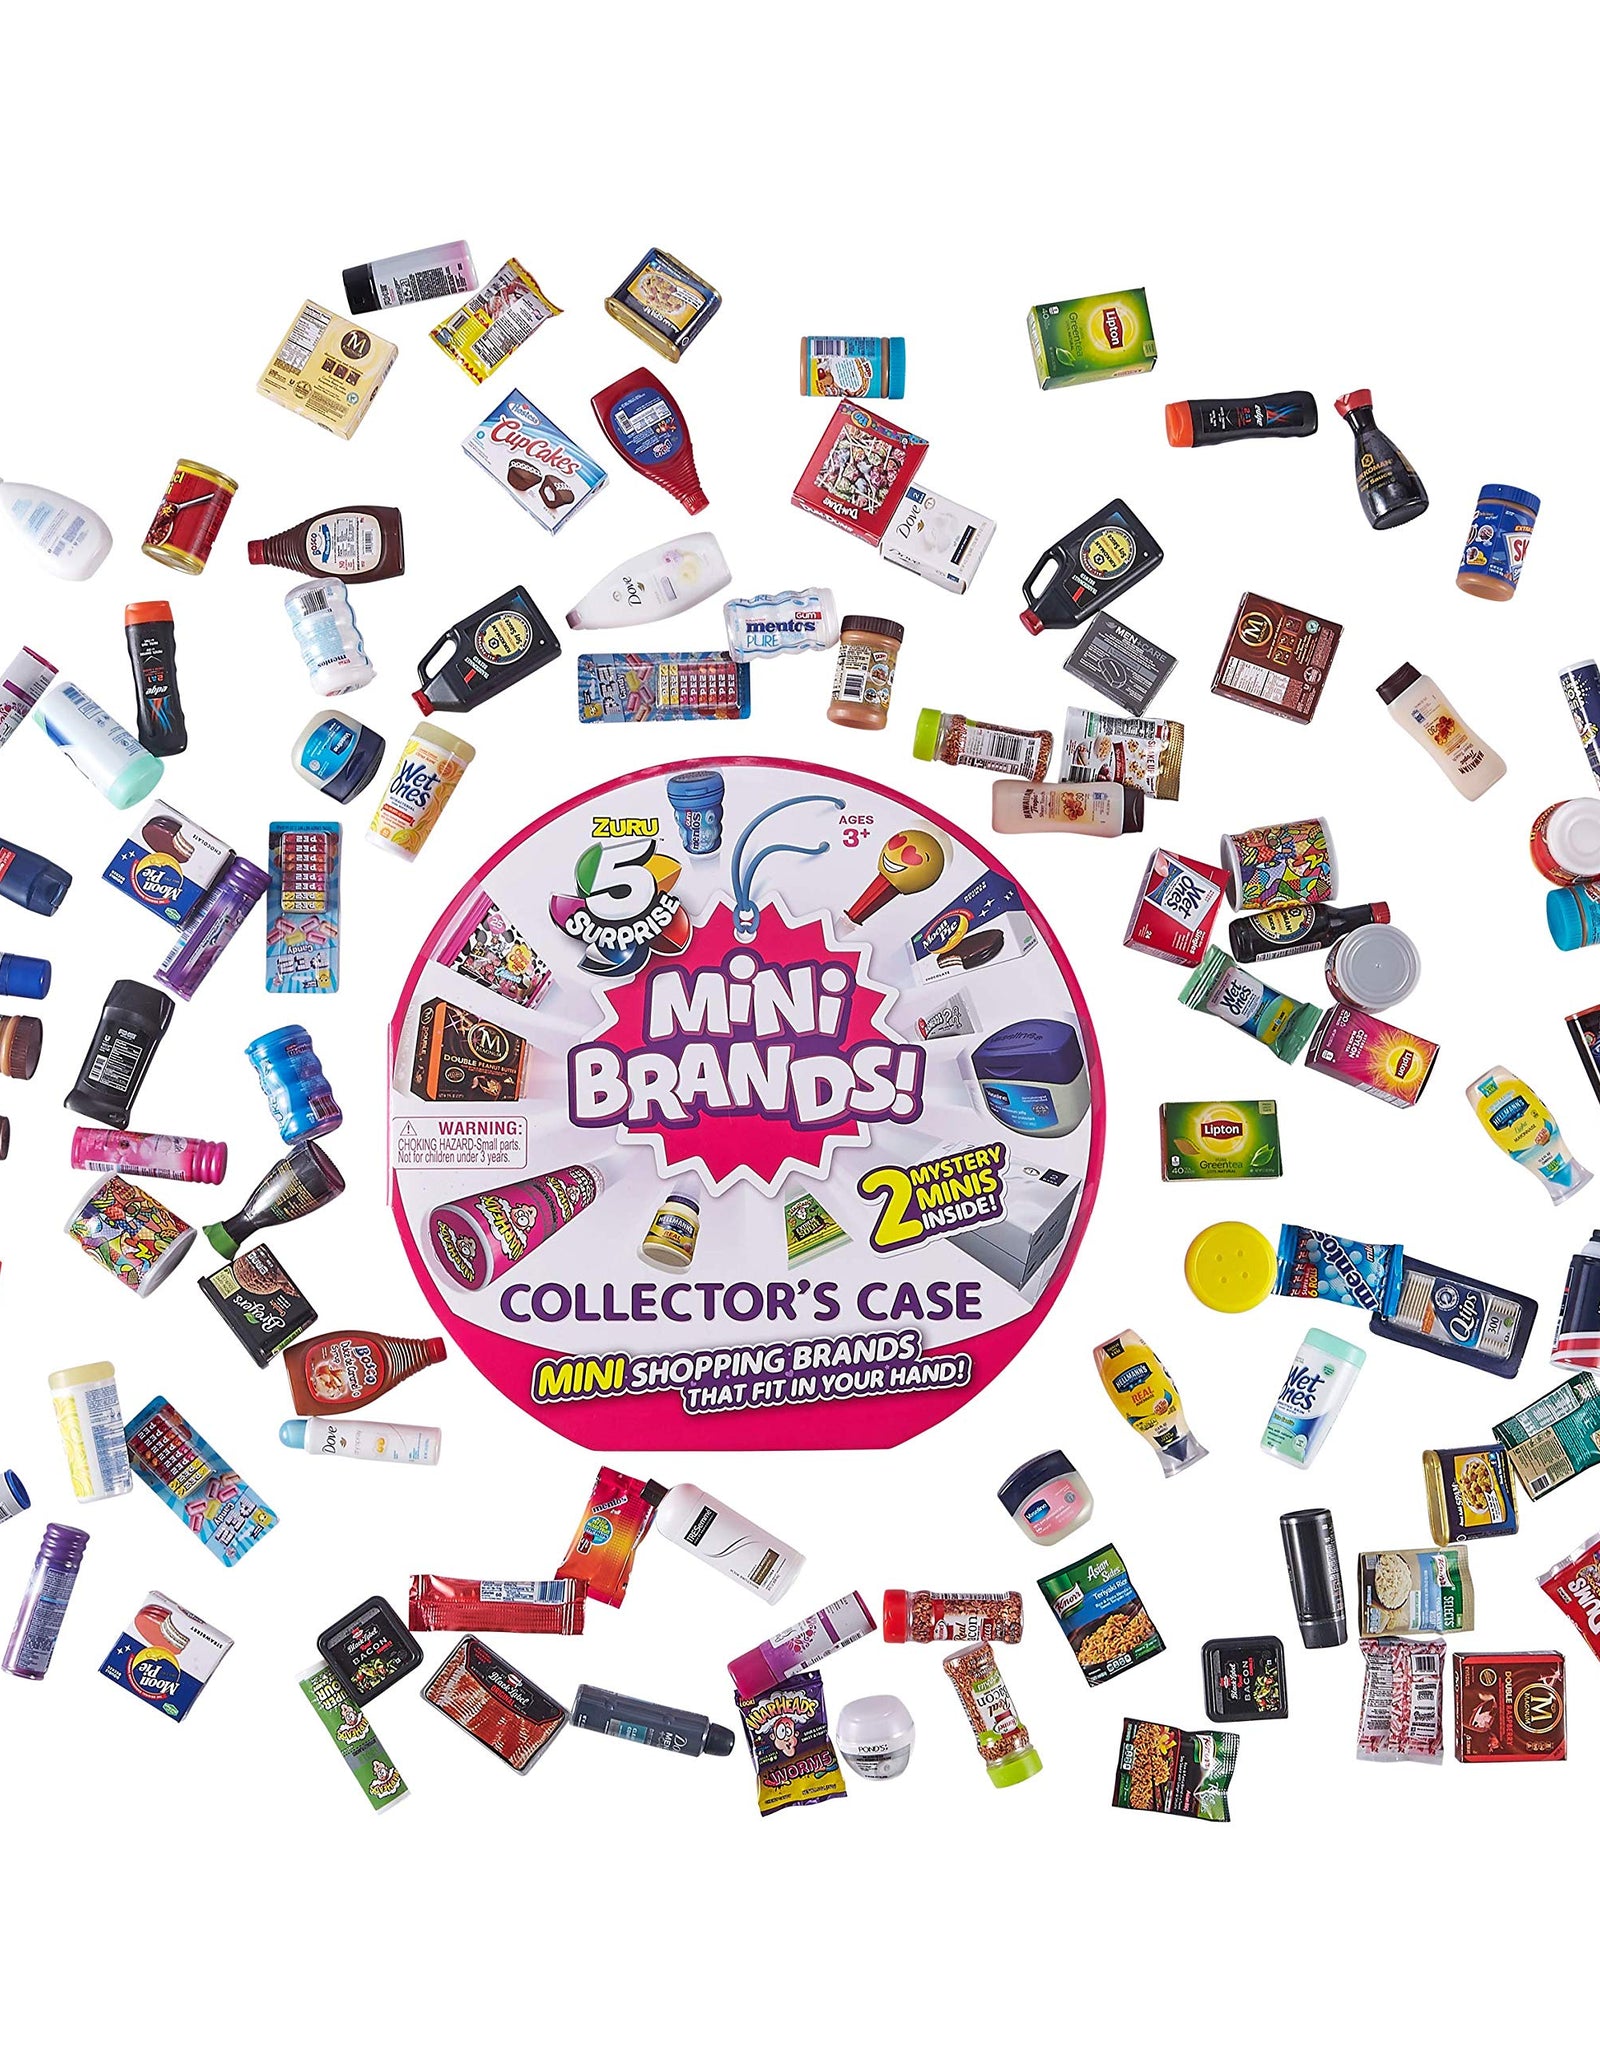 5 Surprise Mini Brands Collector's Kit Series 1 - Amazon Exclusive Mystery Capsule Real Miniature Brands by Zuru (3 Capsules + 1 Collector's Case)